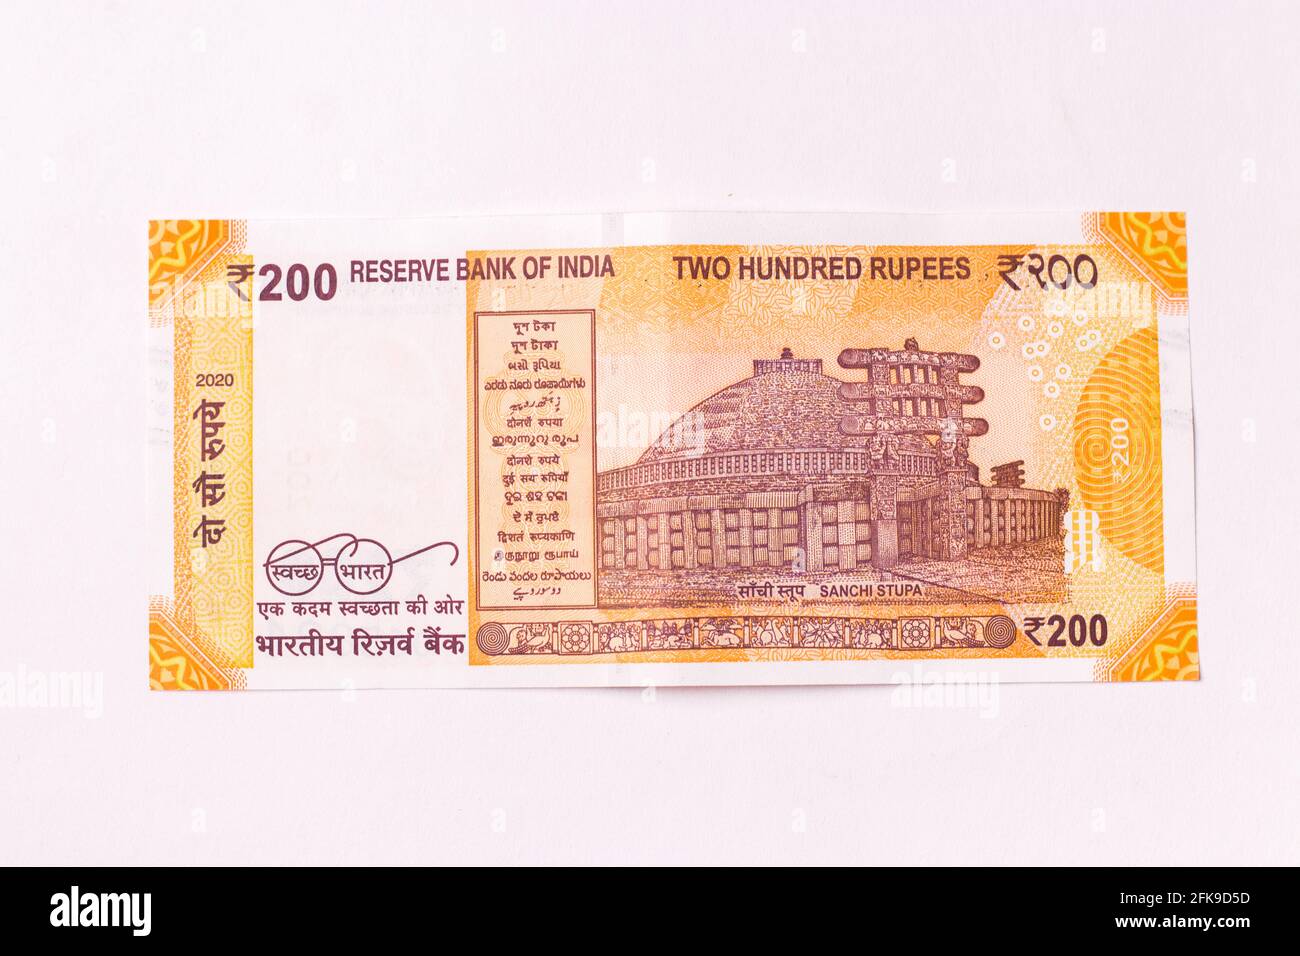 Assam, india - March 30, 2021 : Indian new 200 Rupees note stock image. Stock Photo